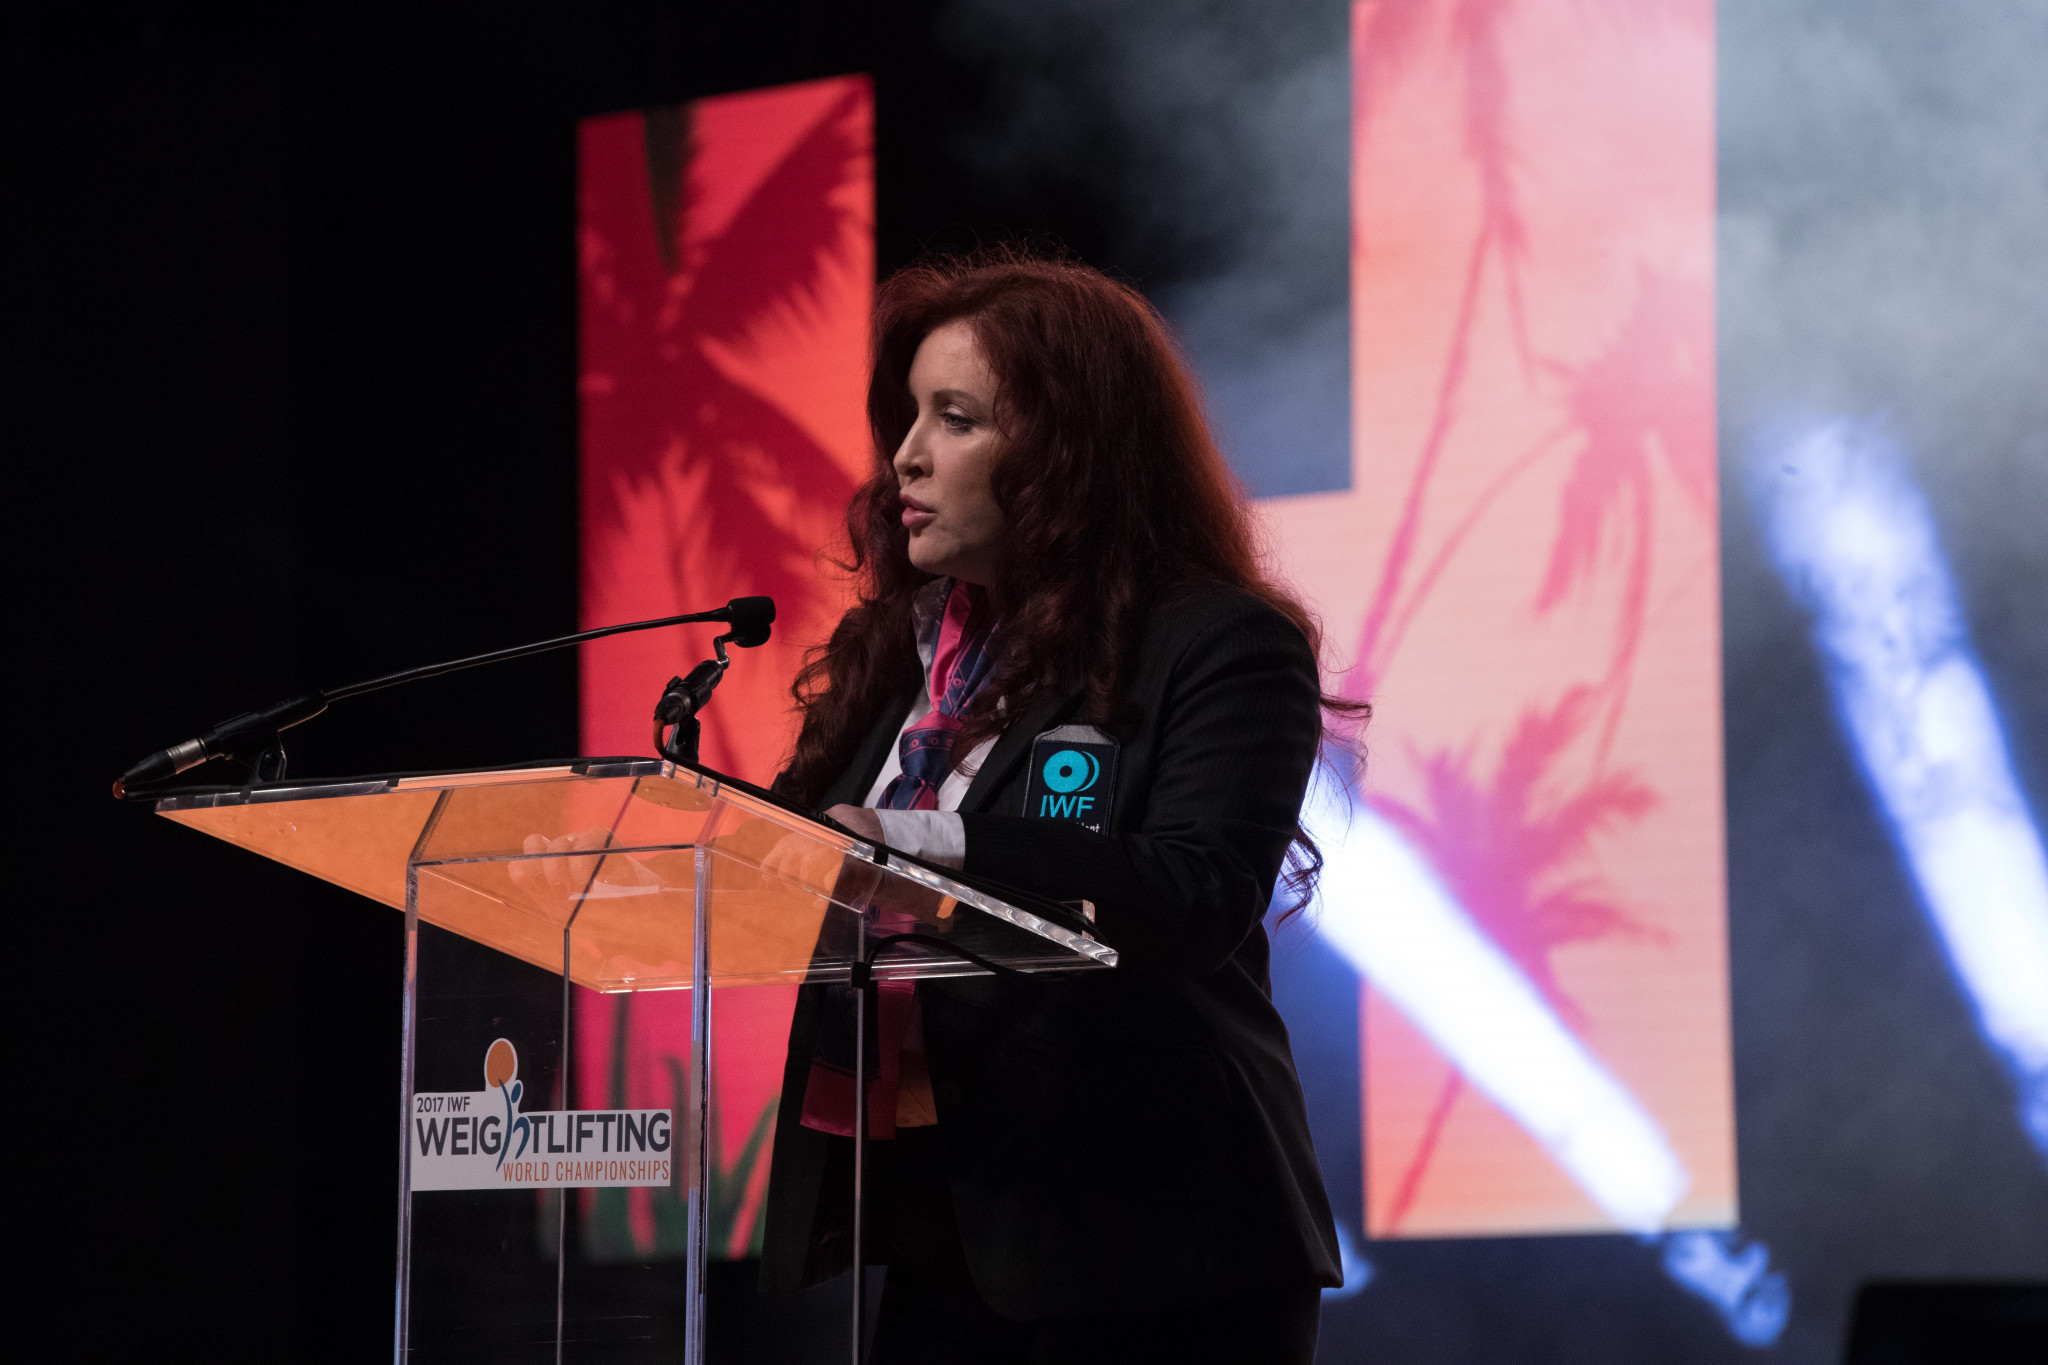 Ursula Papandrea, who was ousted as Interim President of the IWF last year, has confirmed her eligibility to stand for the Presidency ©Lifting Life/USAW